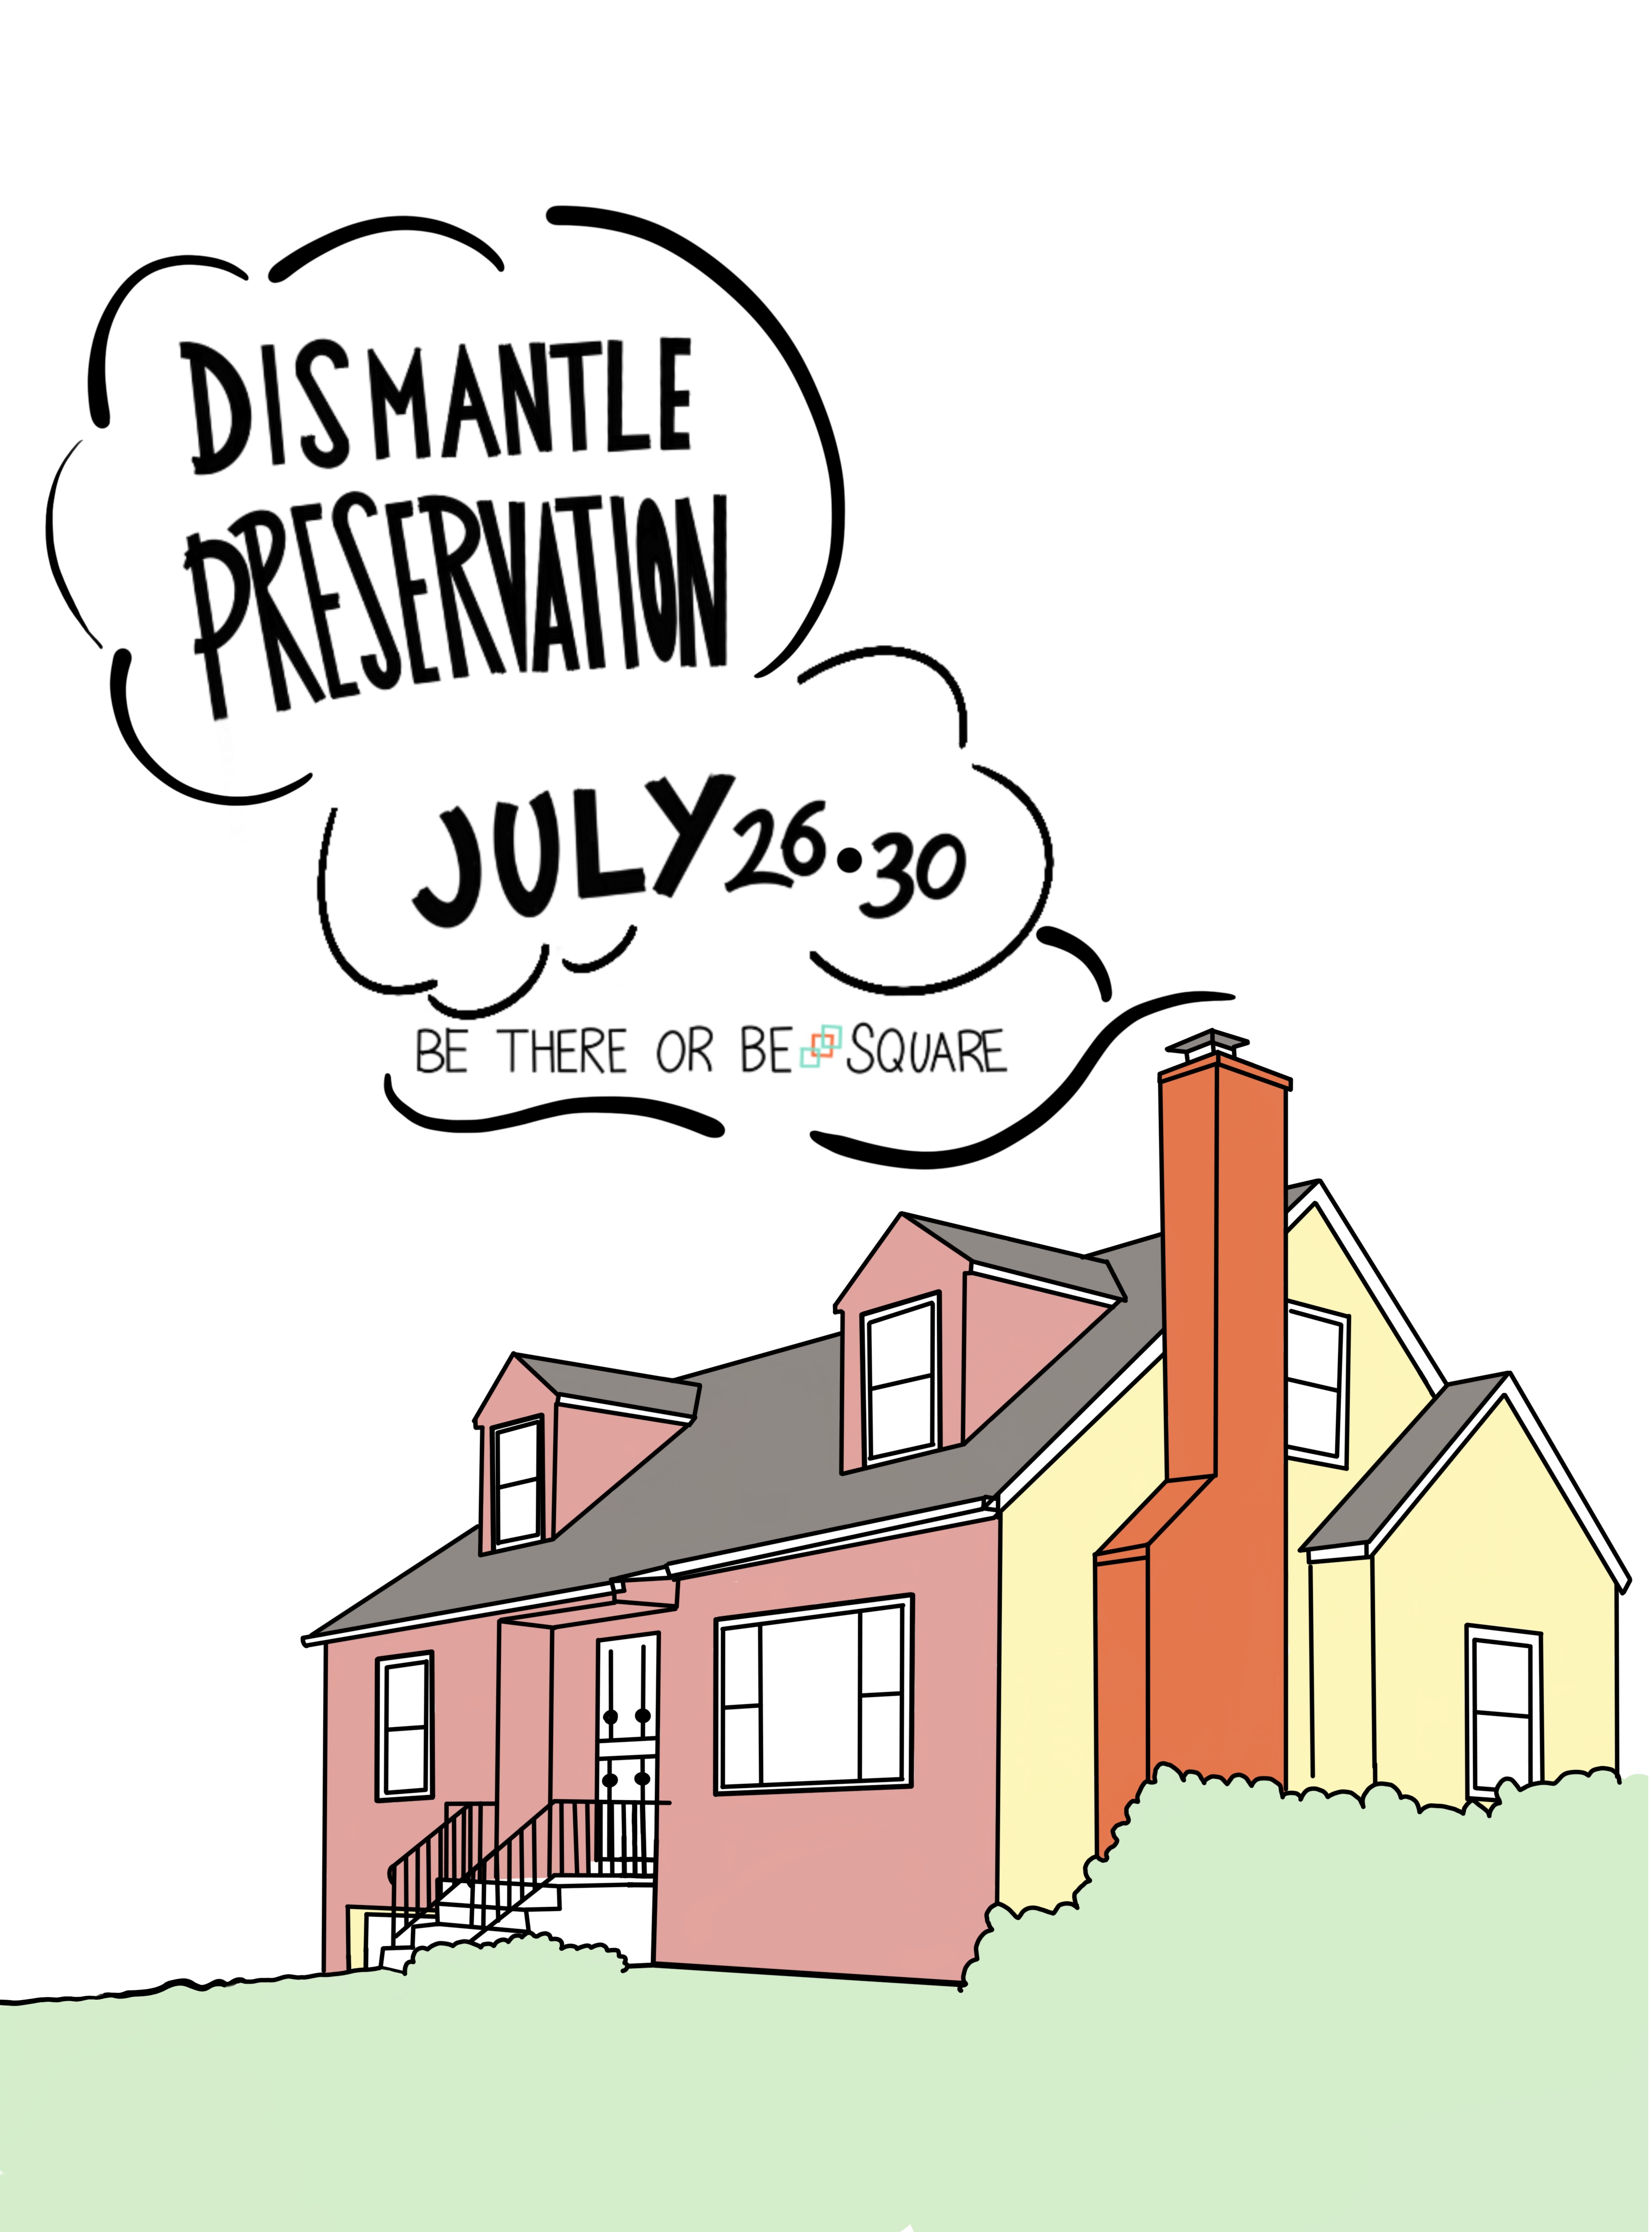 "Dismantle Preservation July 26-30 Be There Or Be Square"